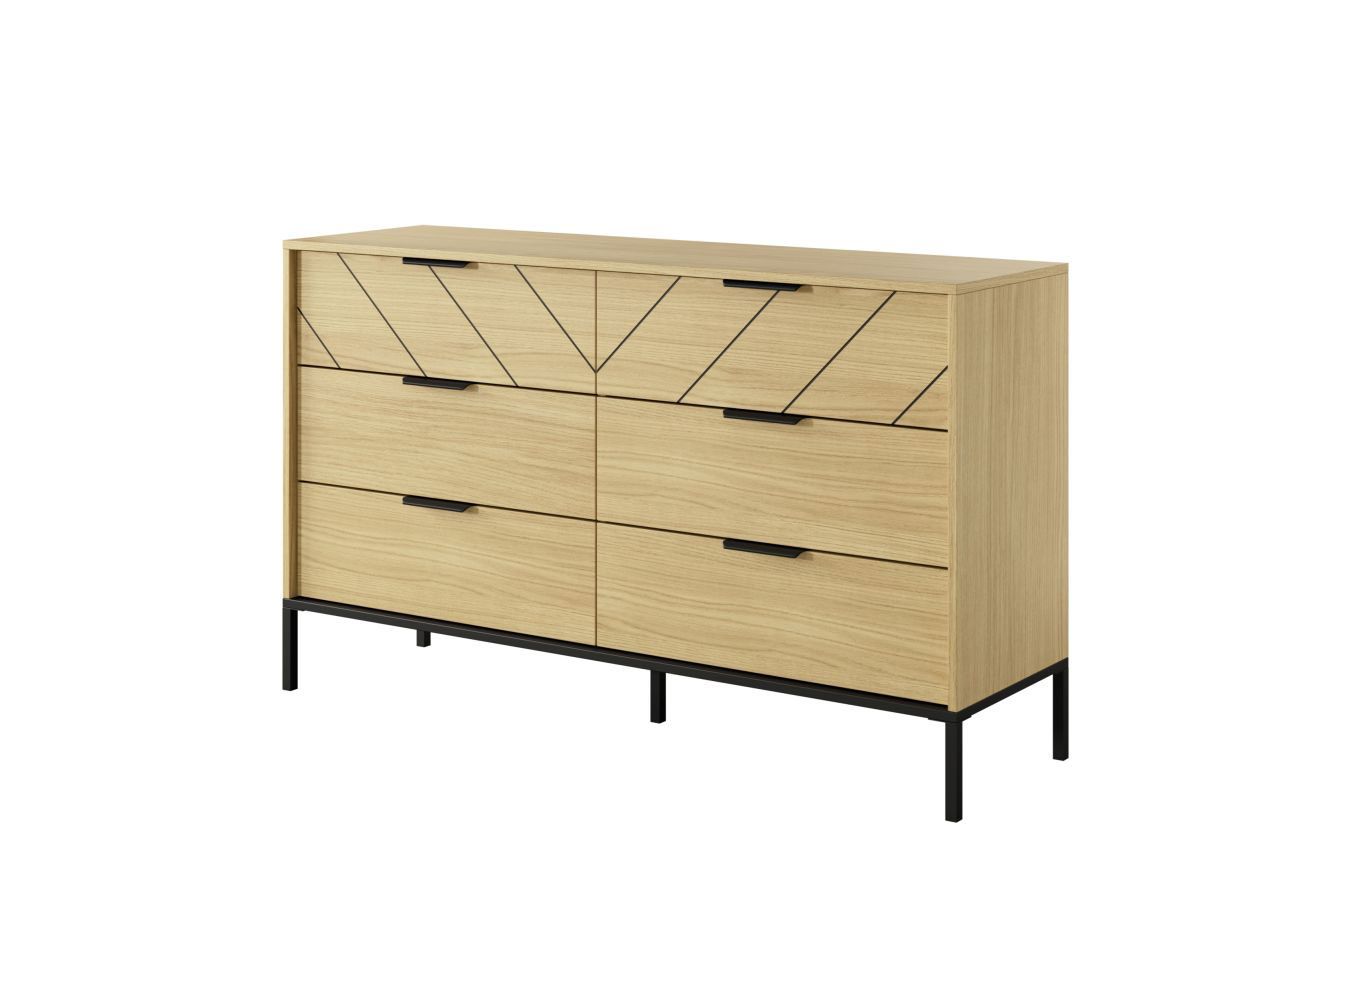 Modern chest of drawers with six drawers Damous 02, color: Scandi oak / black - Dimensions: 81 x 137 x 39.5 cm (H x W x D)